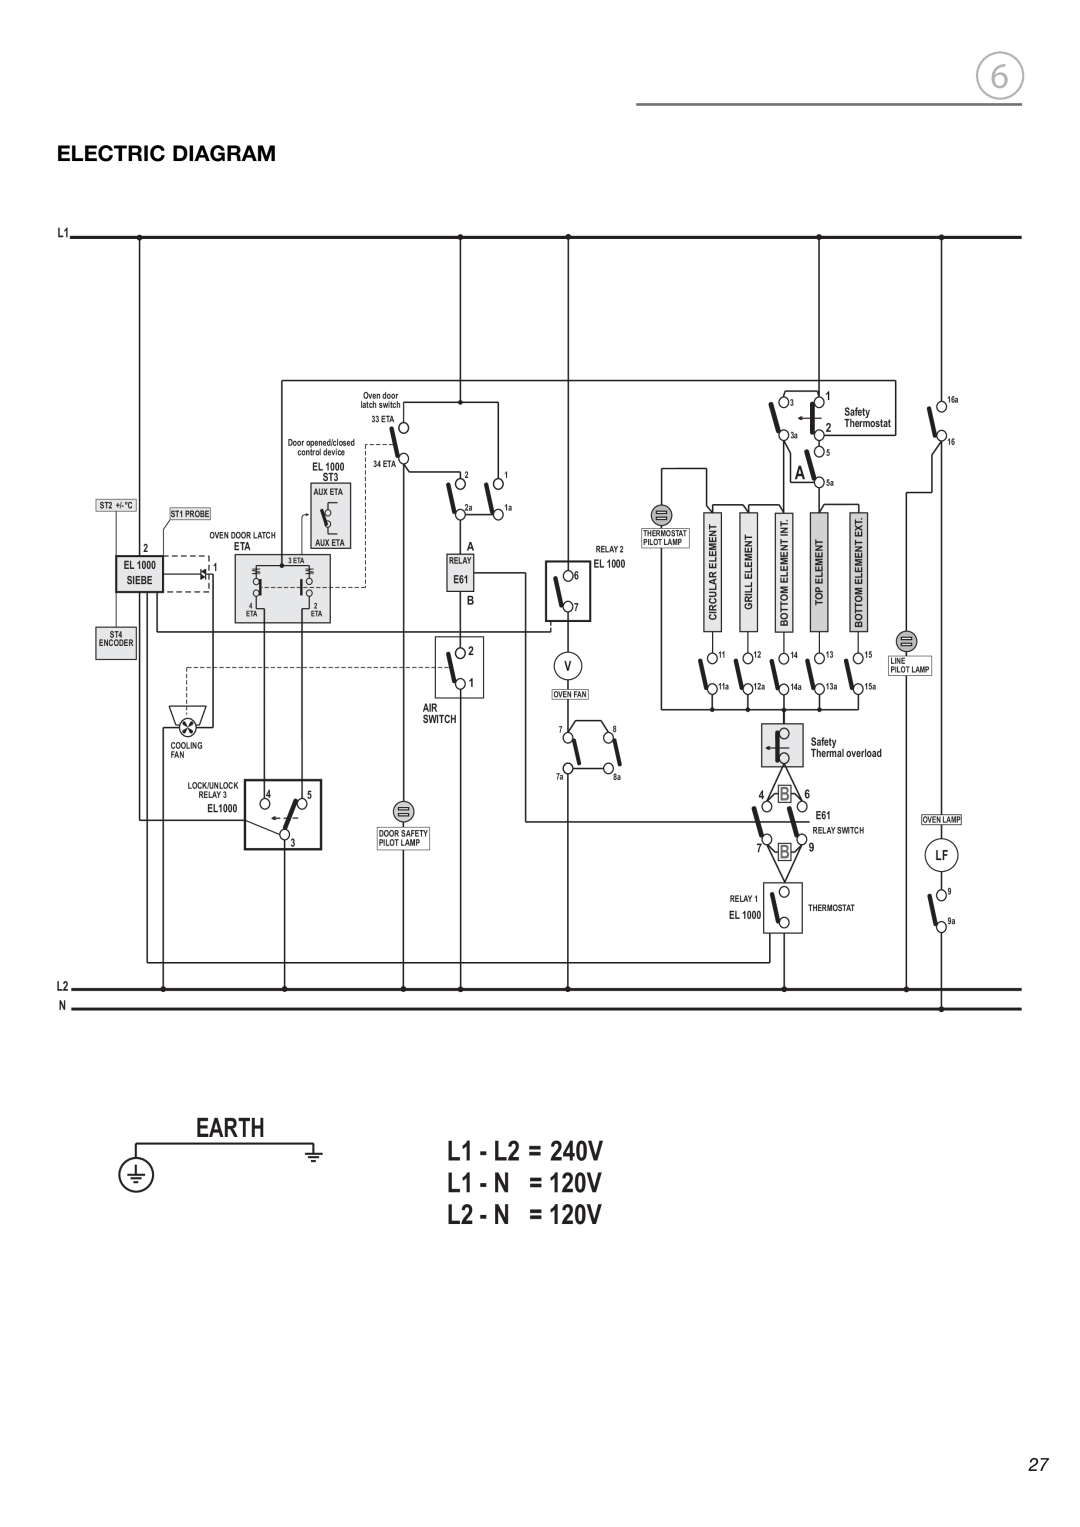 Fisher & Paykel OB24SDPX L1 - L2 =, L1 - N, L2 - N, Electric Diagram, Earth, Safety, Thermostat, Switch, Thermal overload 